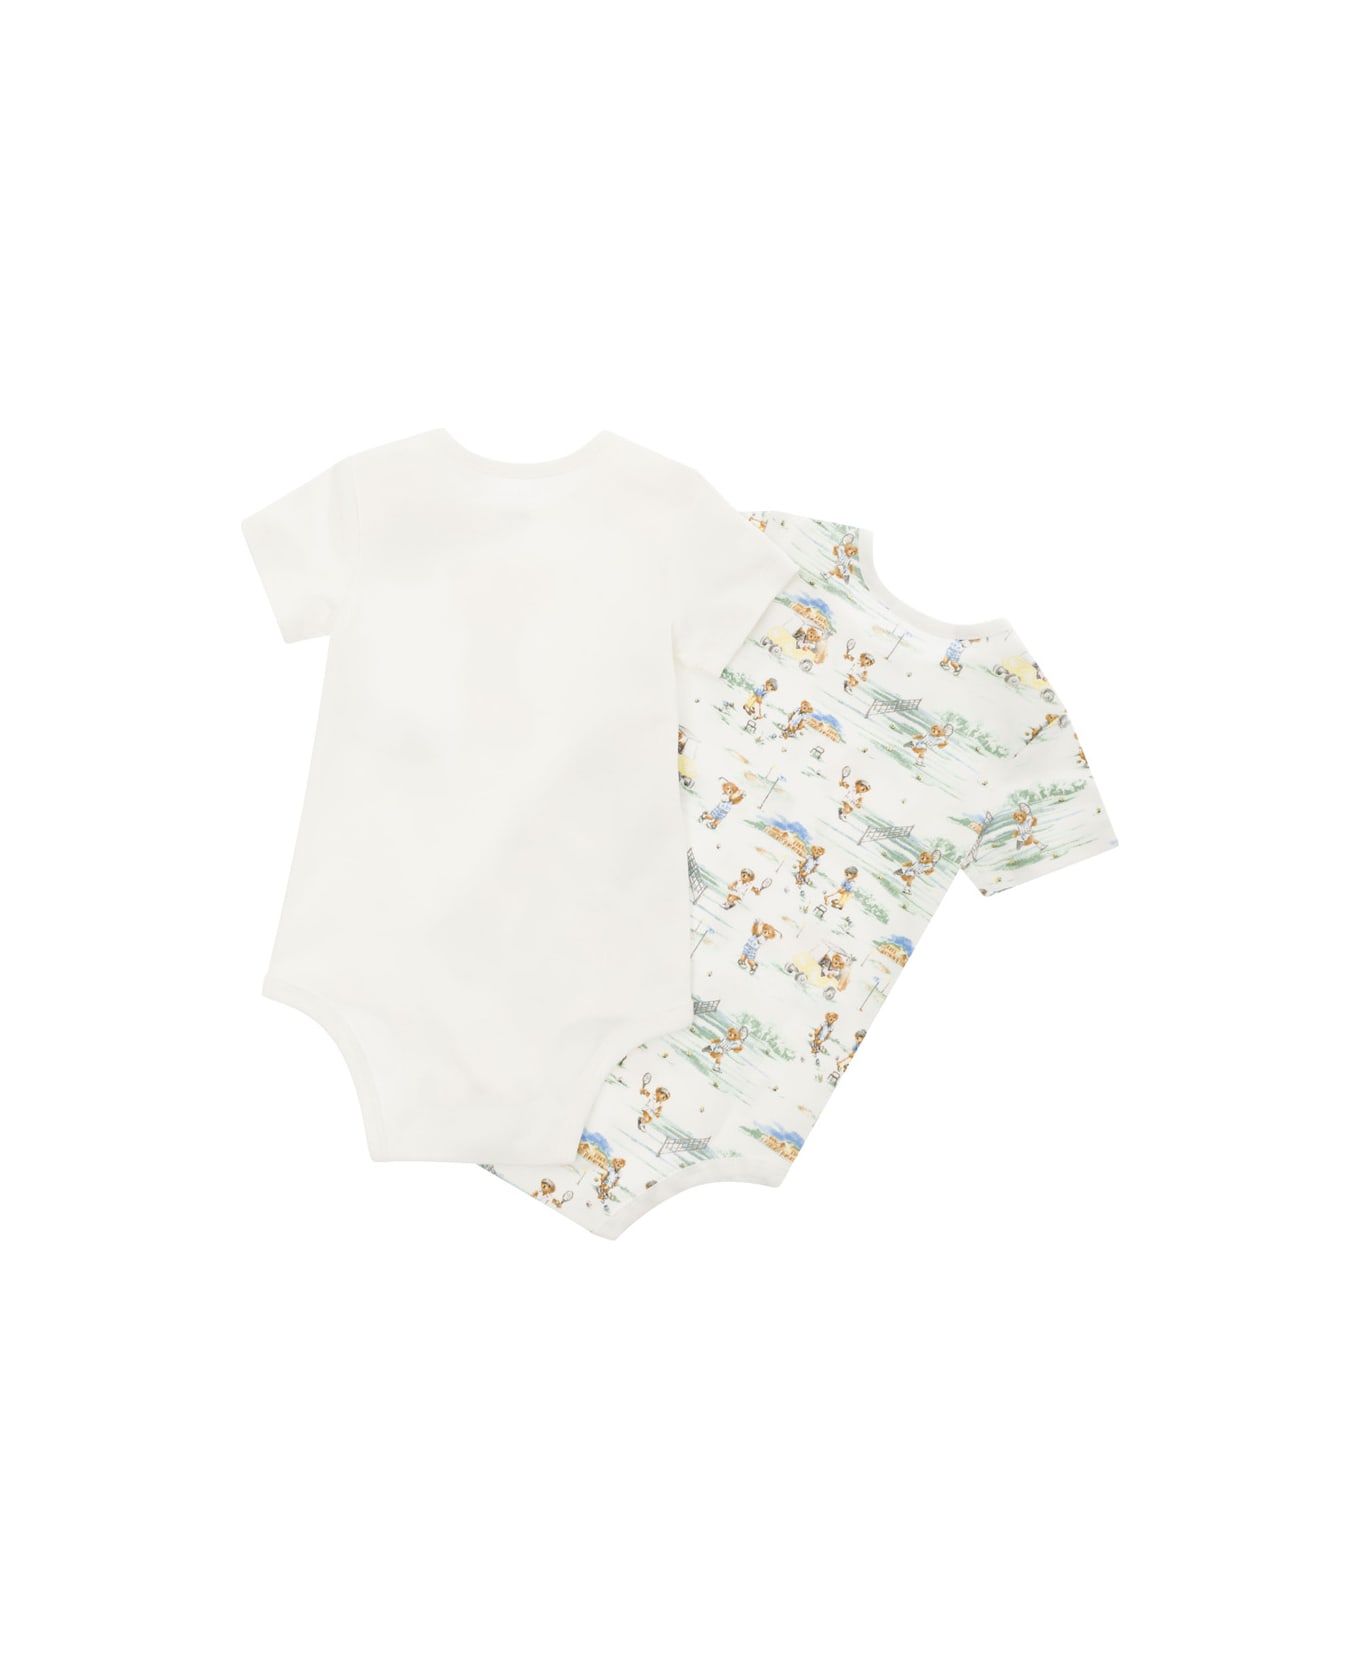 Polo Ralph Lauren White Set Of Two Onesie With Teddy Bear Print In Cotton Baby - Multicolor